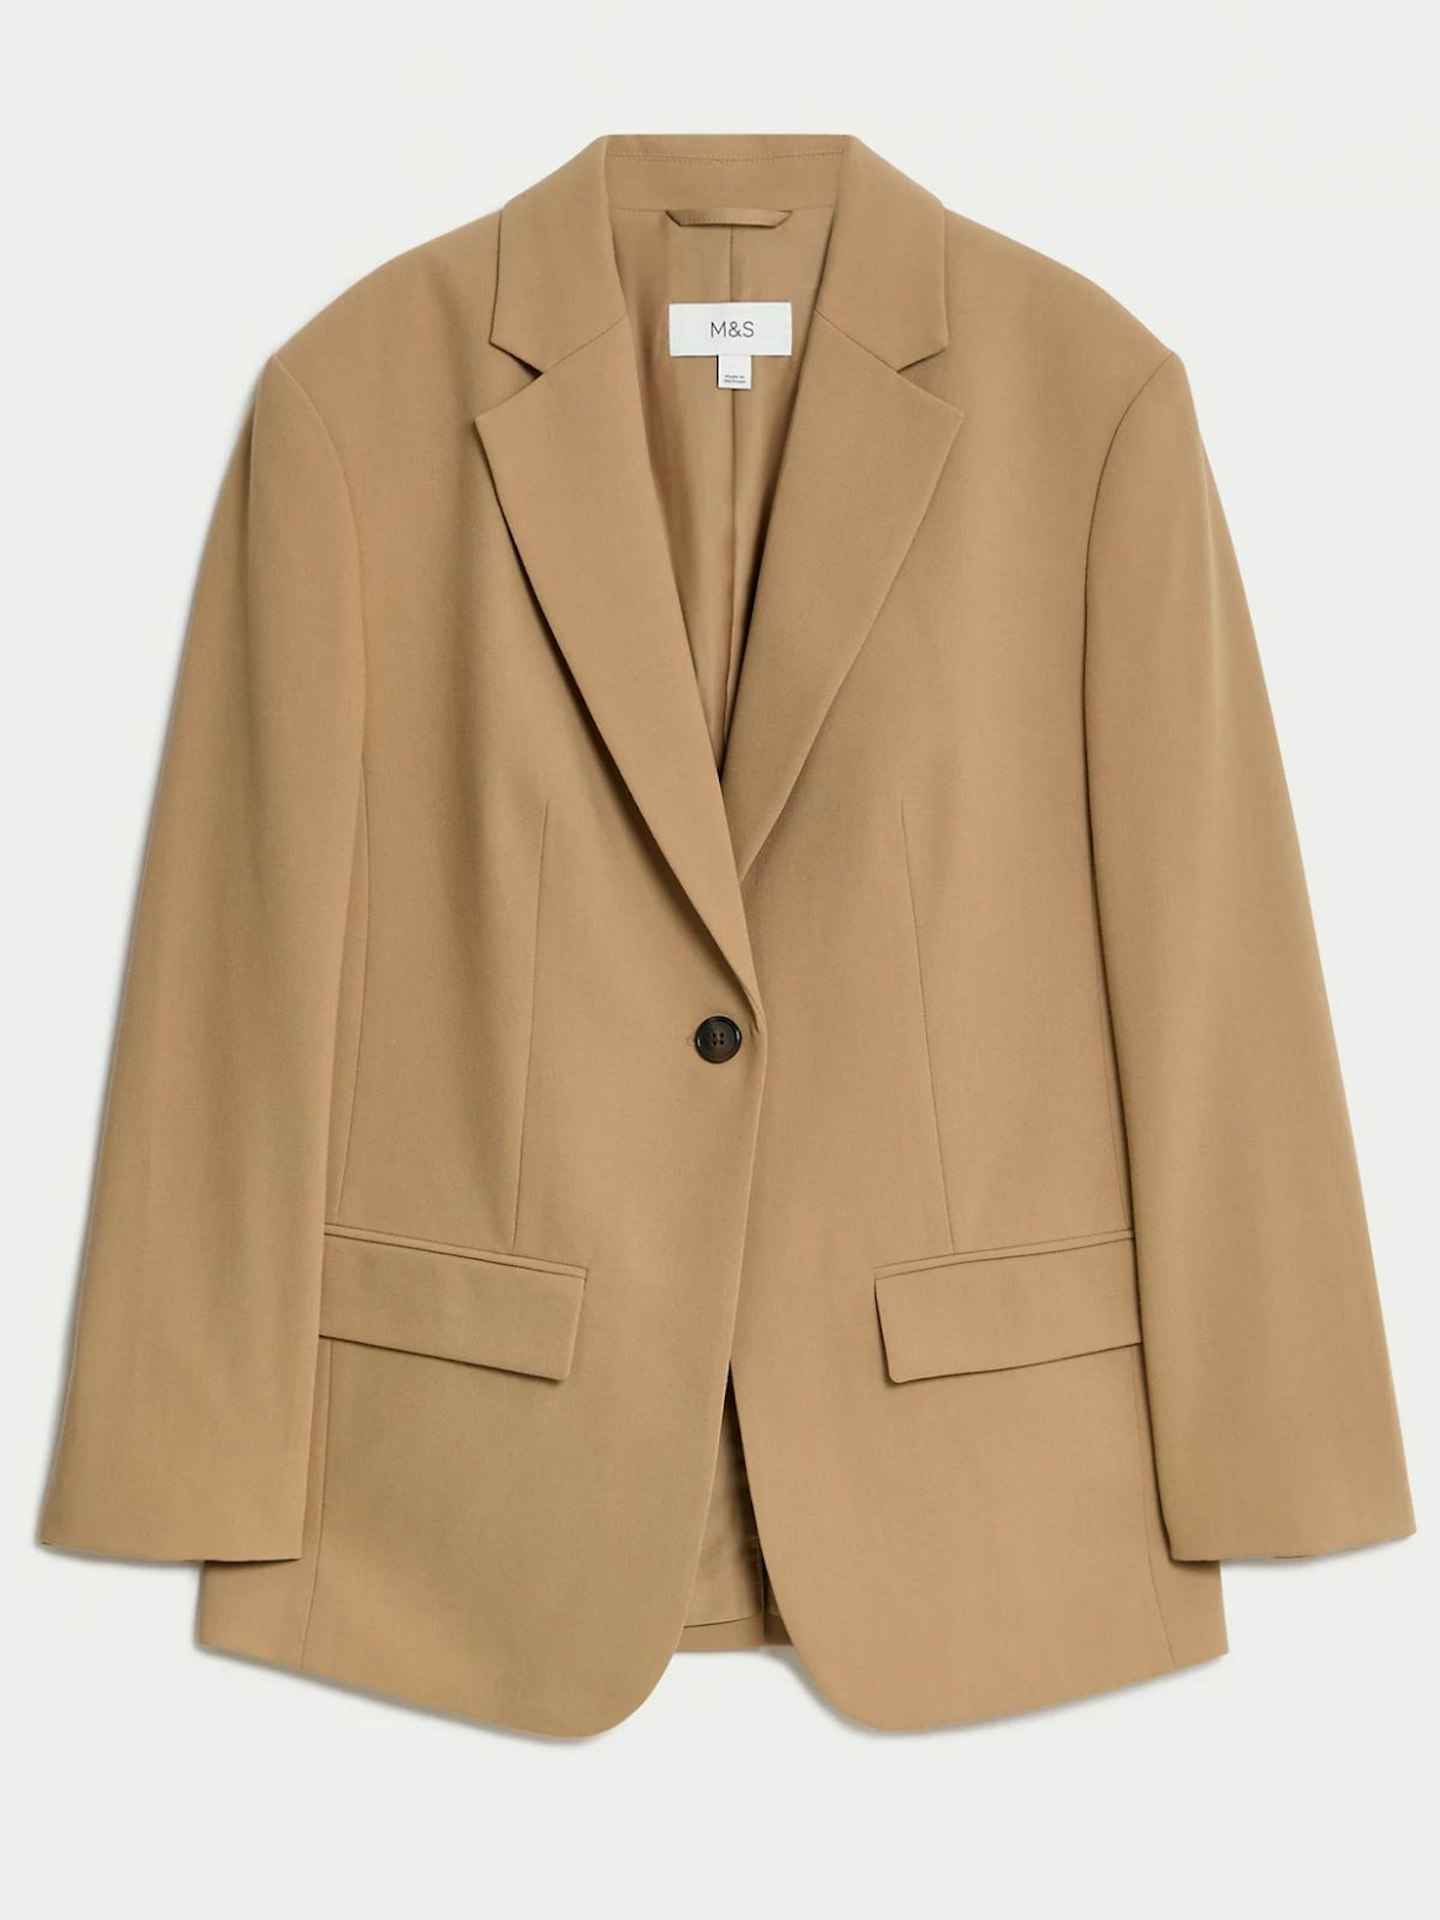 M&S Relaxed Single Breasted Blazer